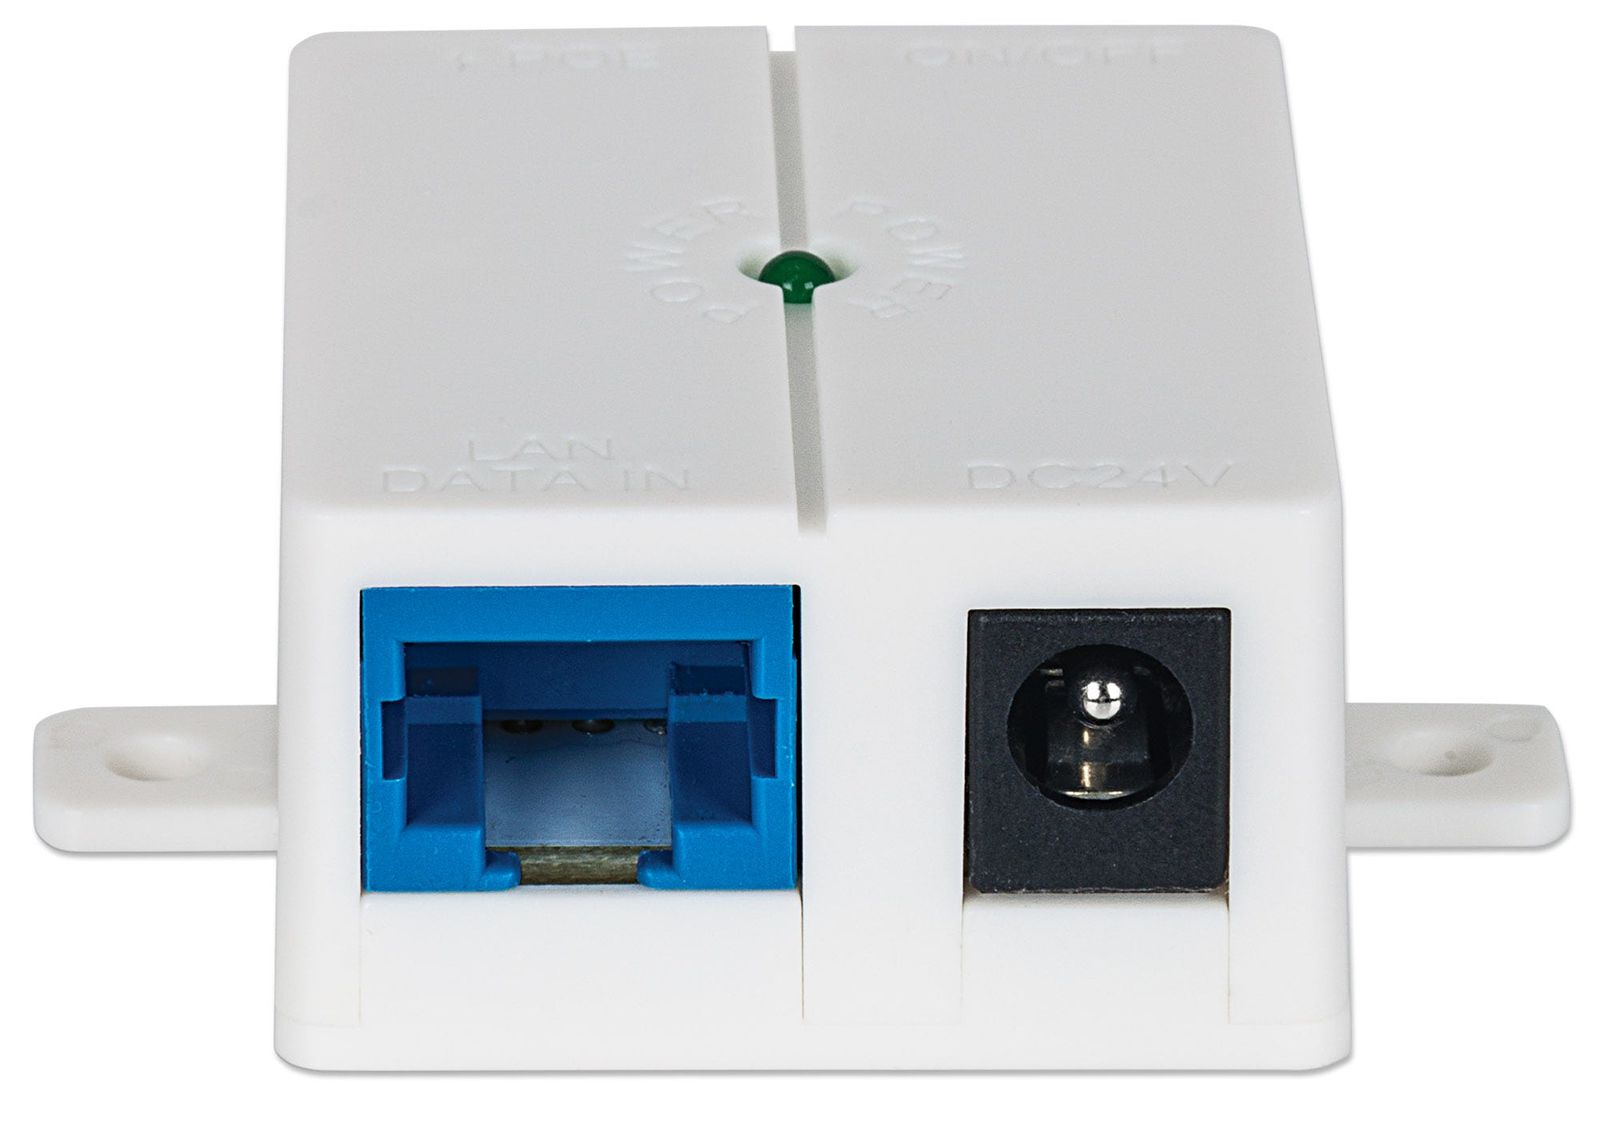 Intellinet 525824 WLAN access point 433 Mbps PoE